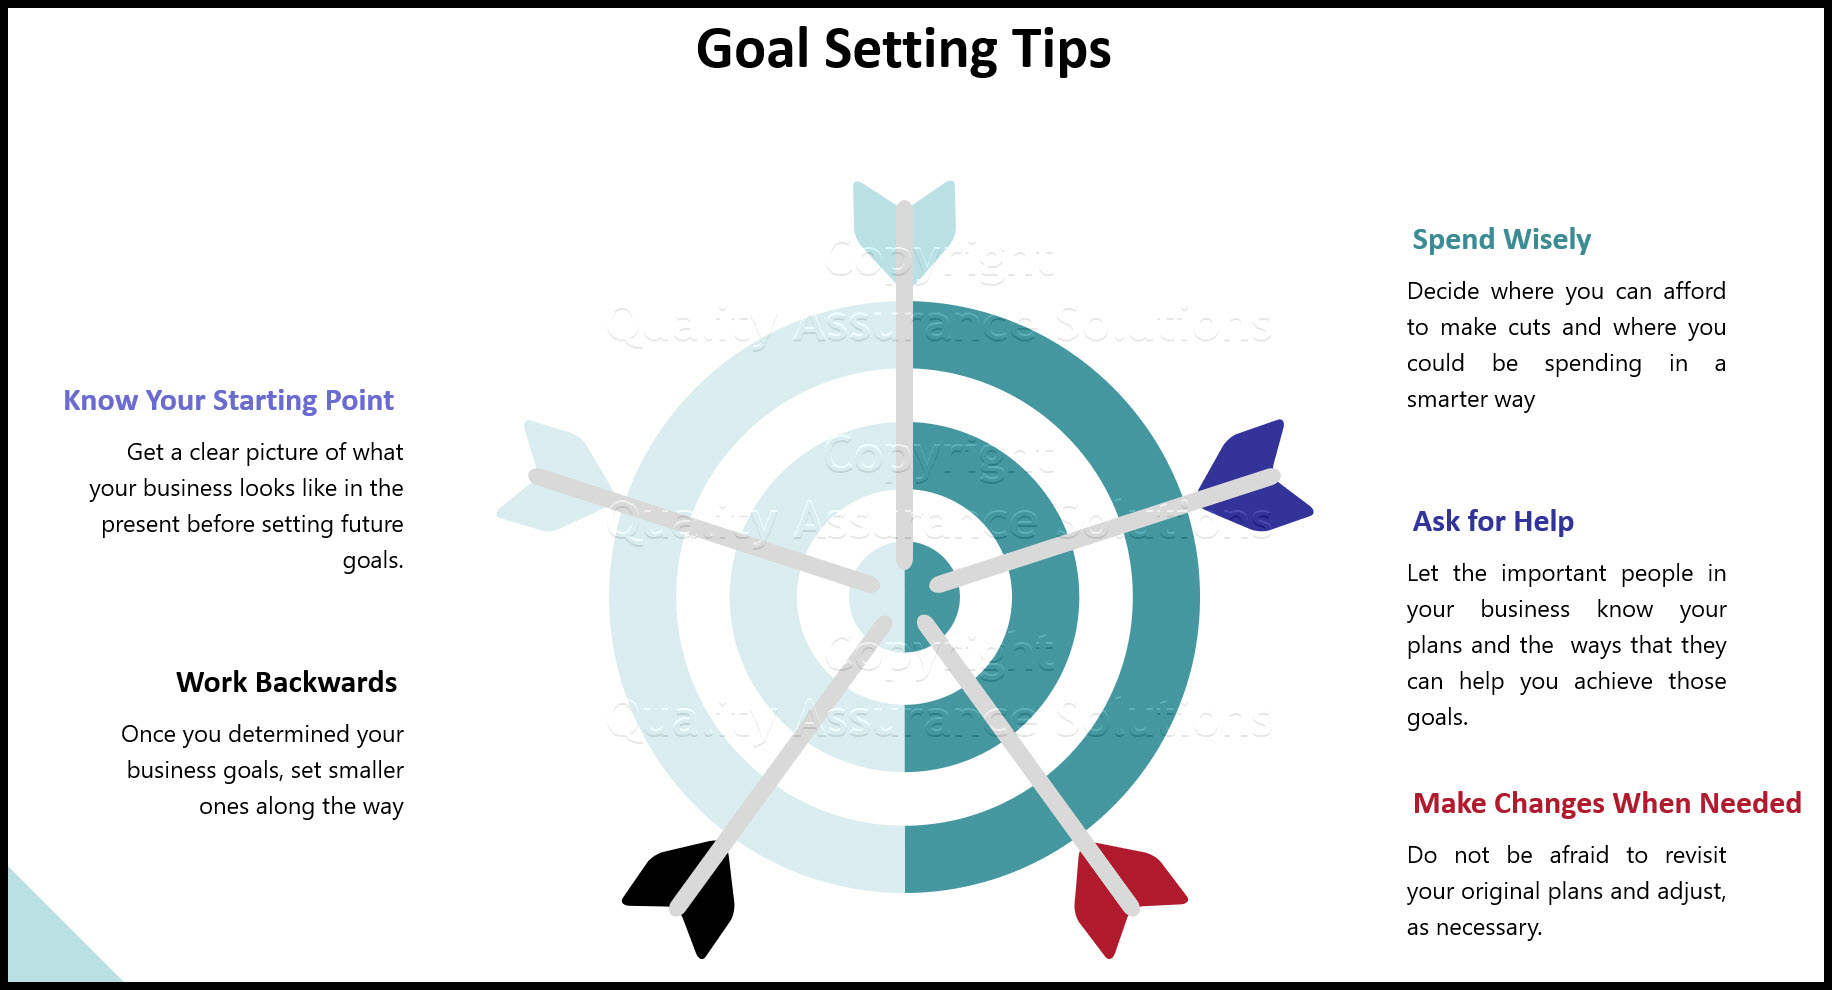 Focus and Goal Setting - Why it's critical for Business